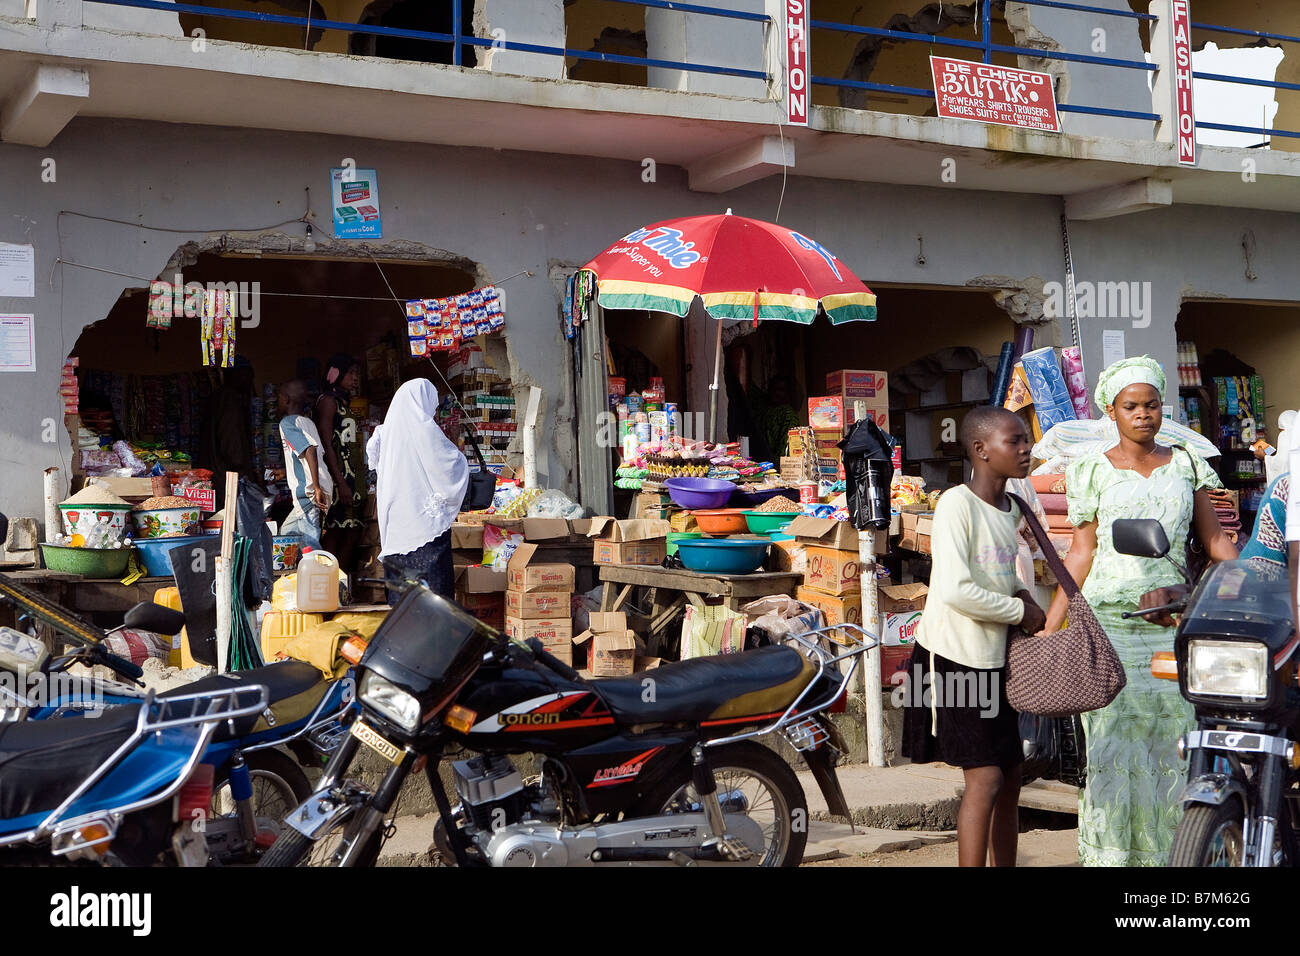 A busy row of shops in Poka, Epe, Lagos, with people outside and motorbikes parked Stock Photo